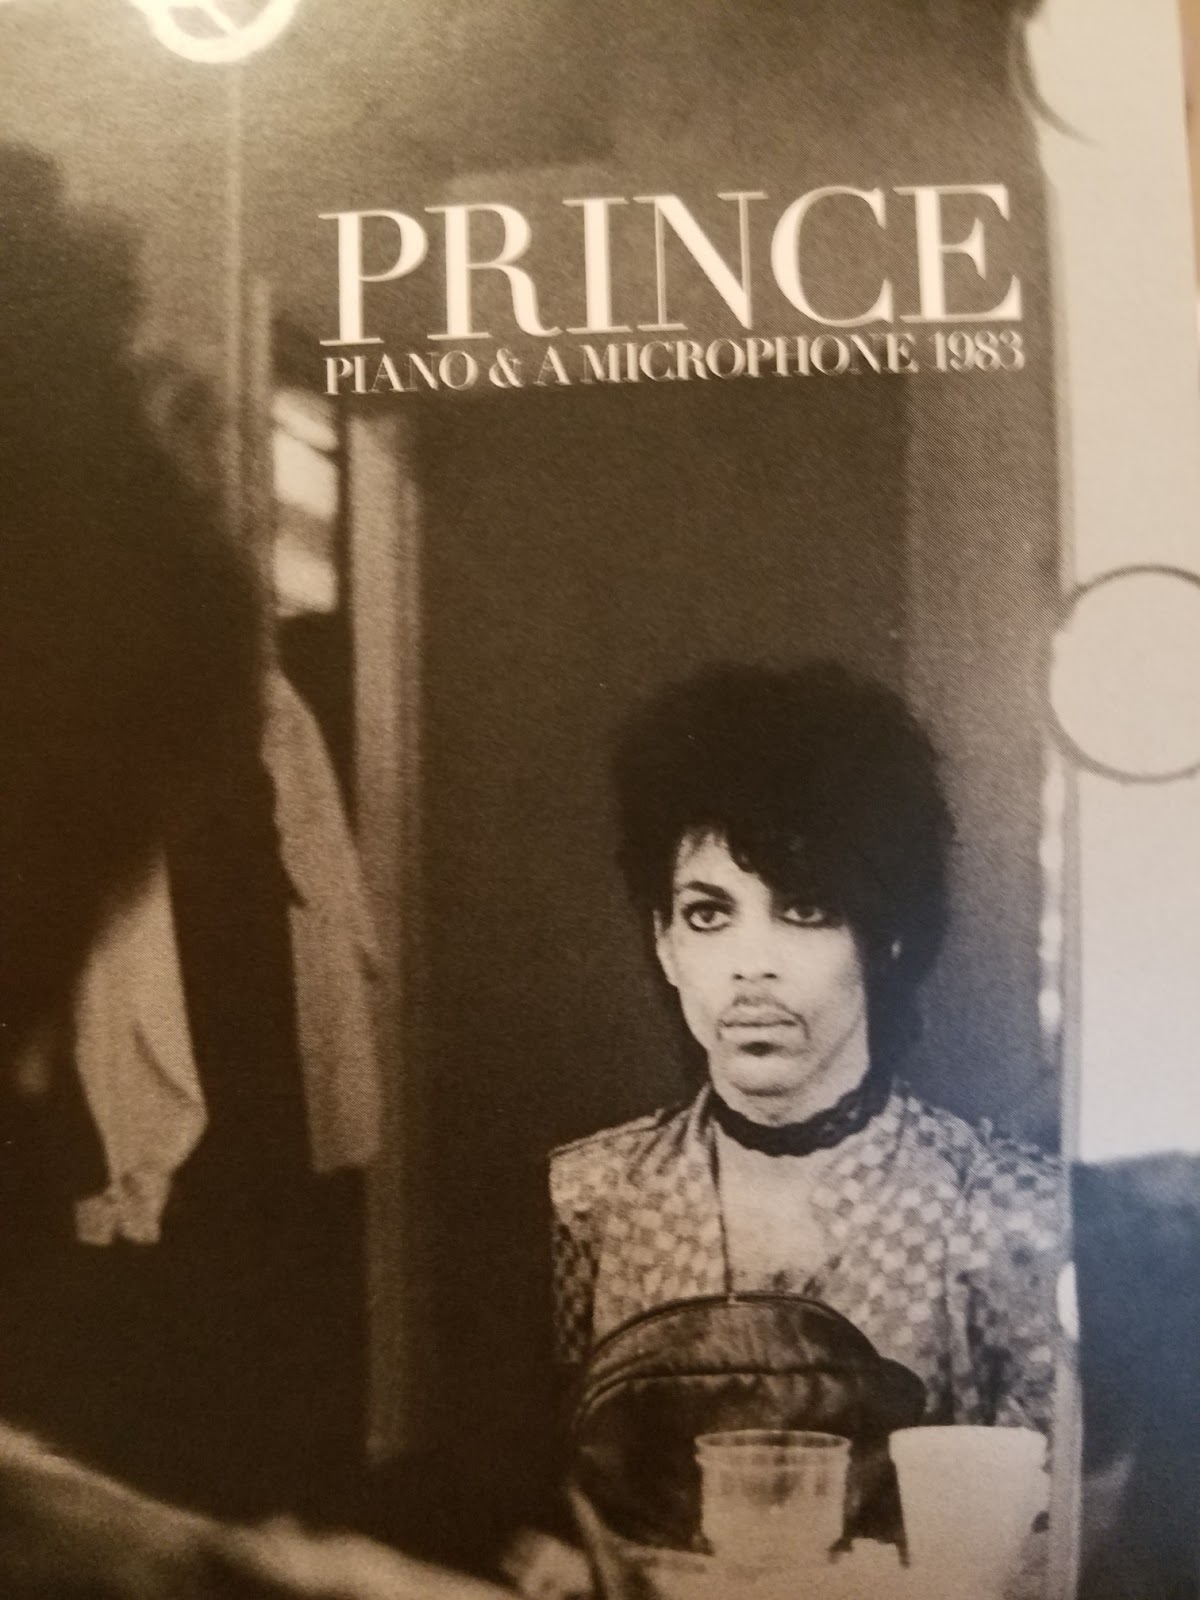 Mark Haugen New Prince CD eases the pain